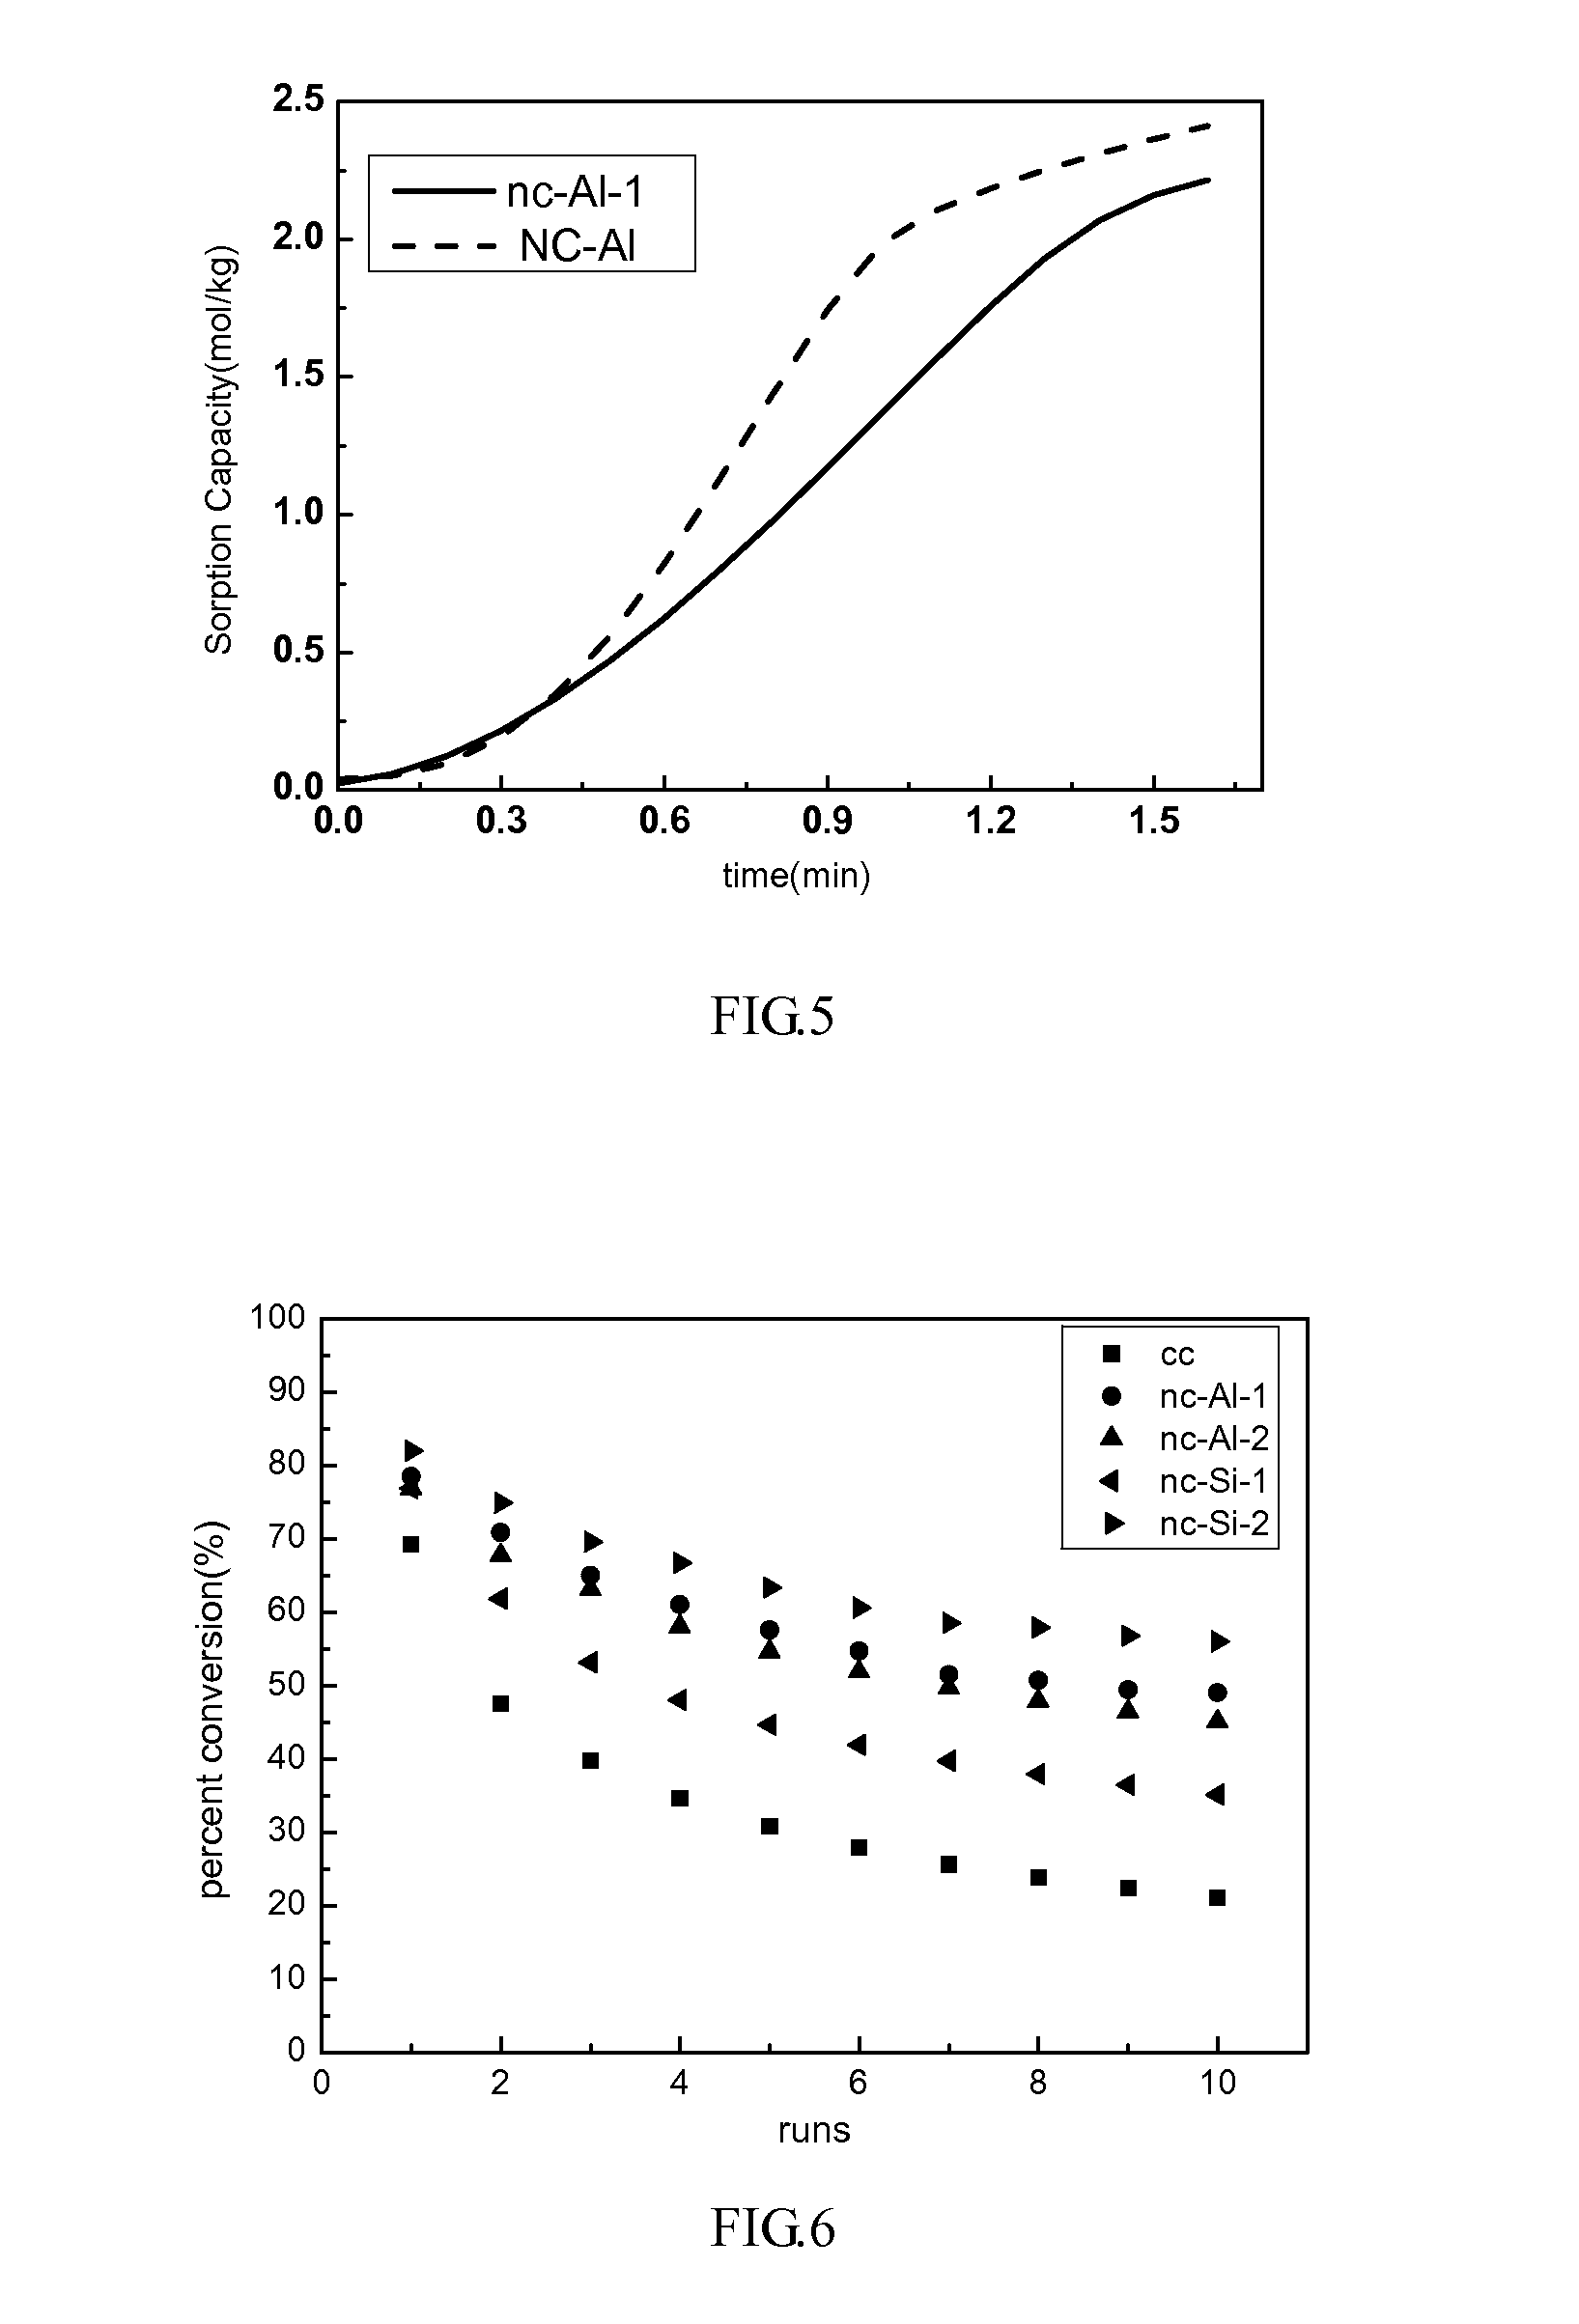 Method for preparing a nano-calcium carbonate slurry from waste gypsum as calcium source, the product and use thereof